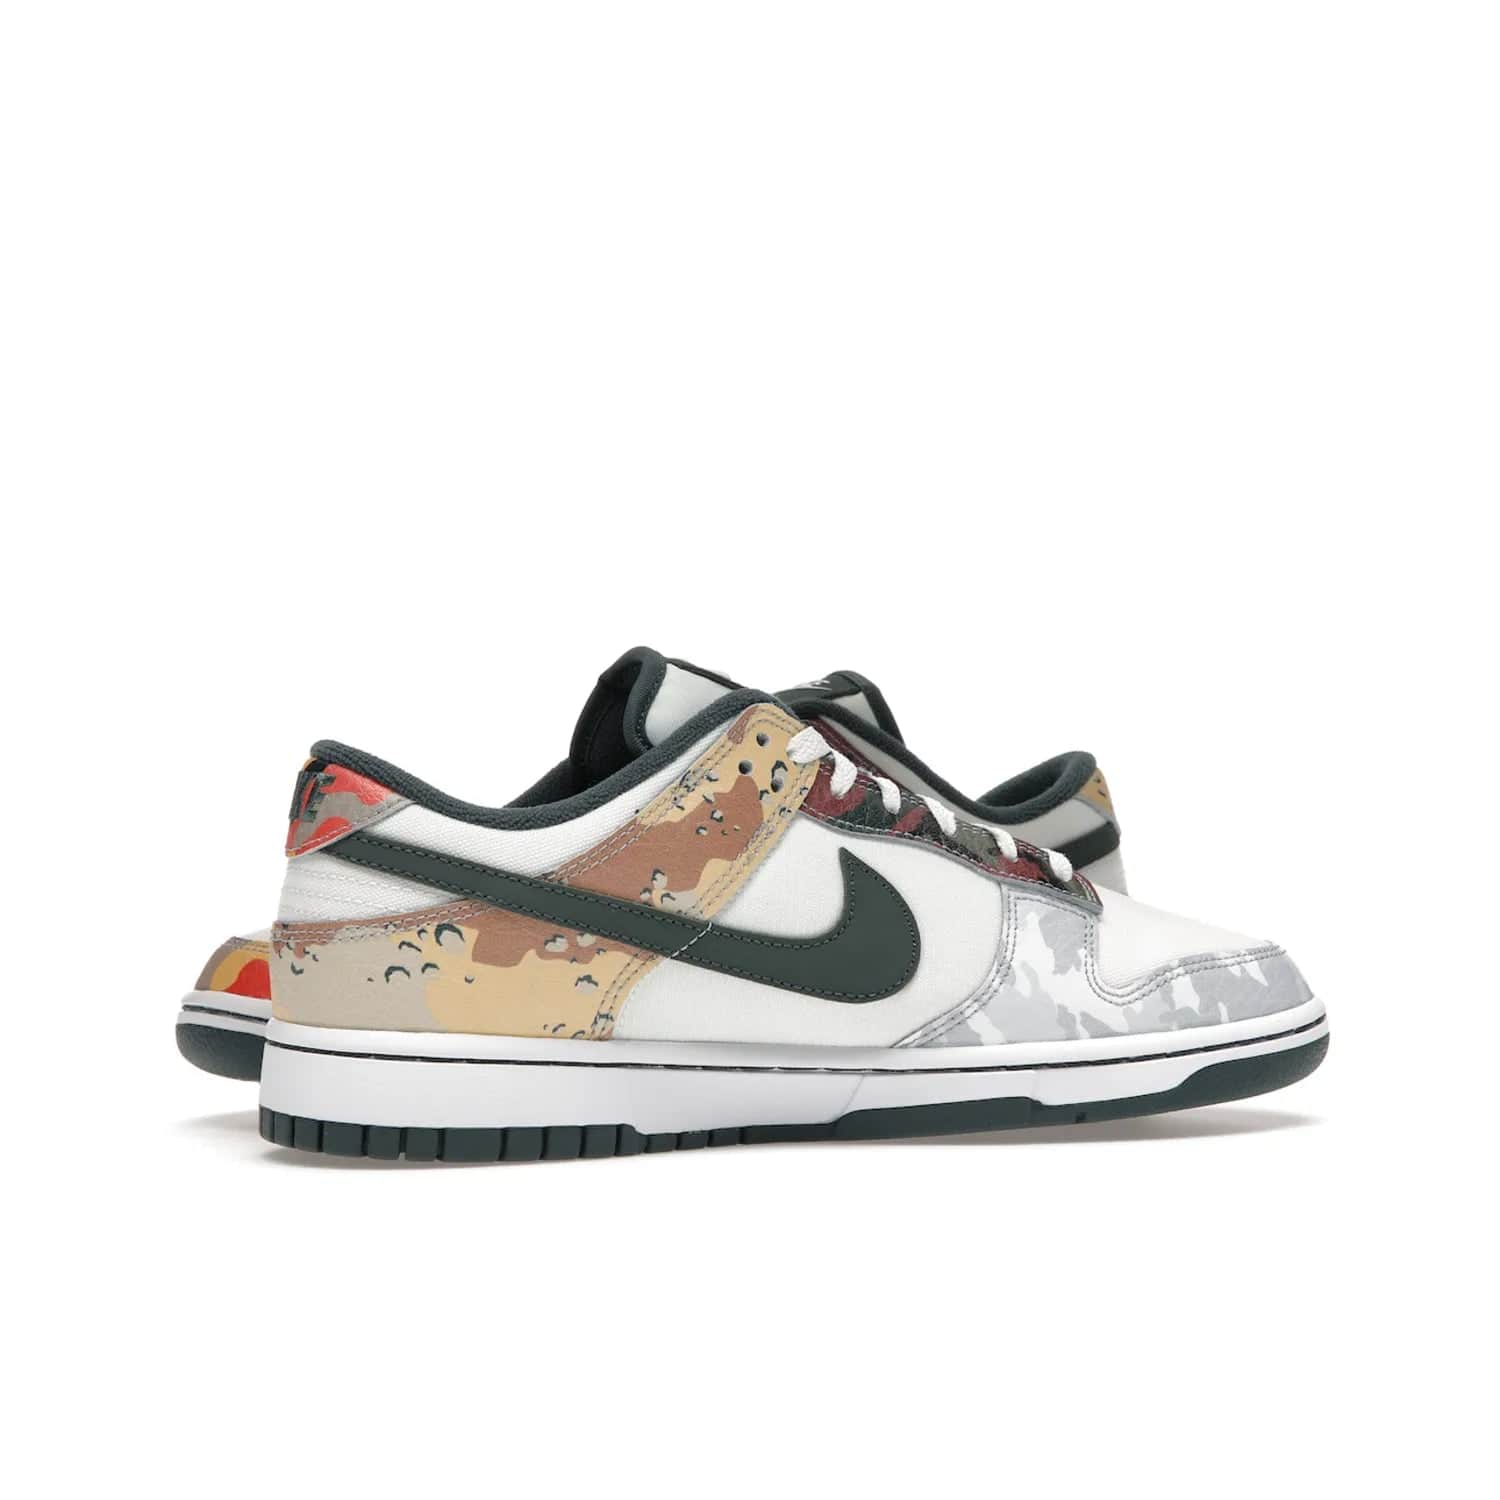 Nike Dunk Low SE Sail Multi-Camo - Image 17 - Only at www.BallersClubKickz.com - Classic design meets statement style in the Nike Dunk Low SE Sail Multi-Camo. White leather base with multi-color camo overlays, vibrant Nike Swooshes, and orange Nike embroidery. Get yours August 2021.